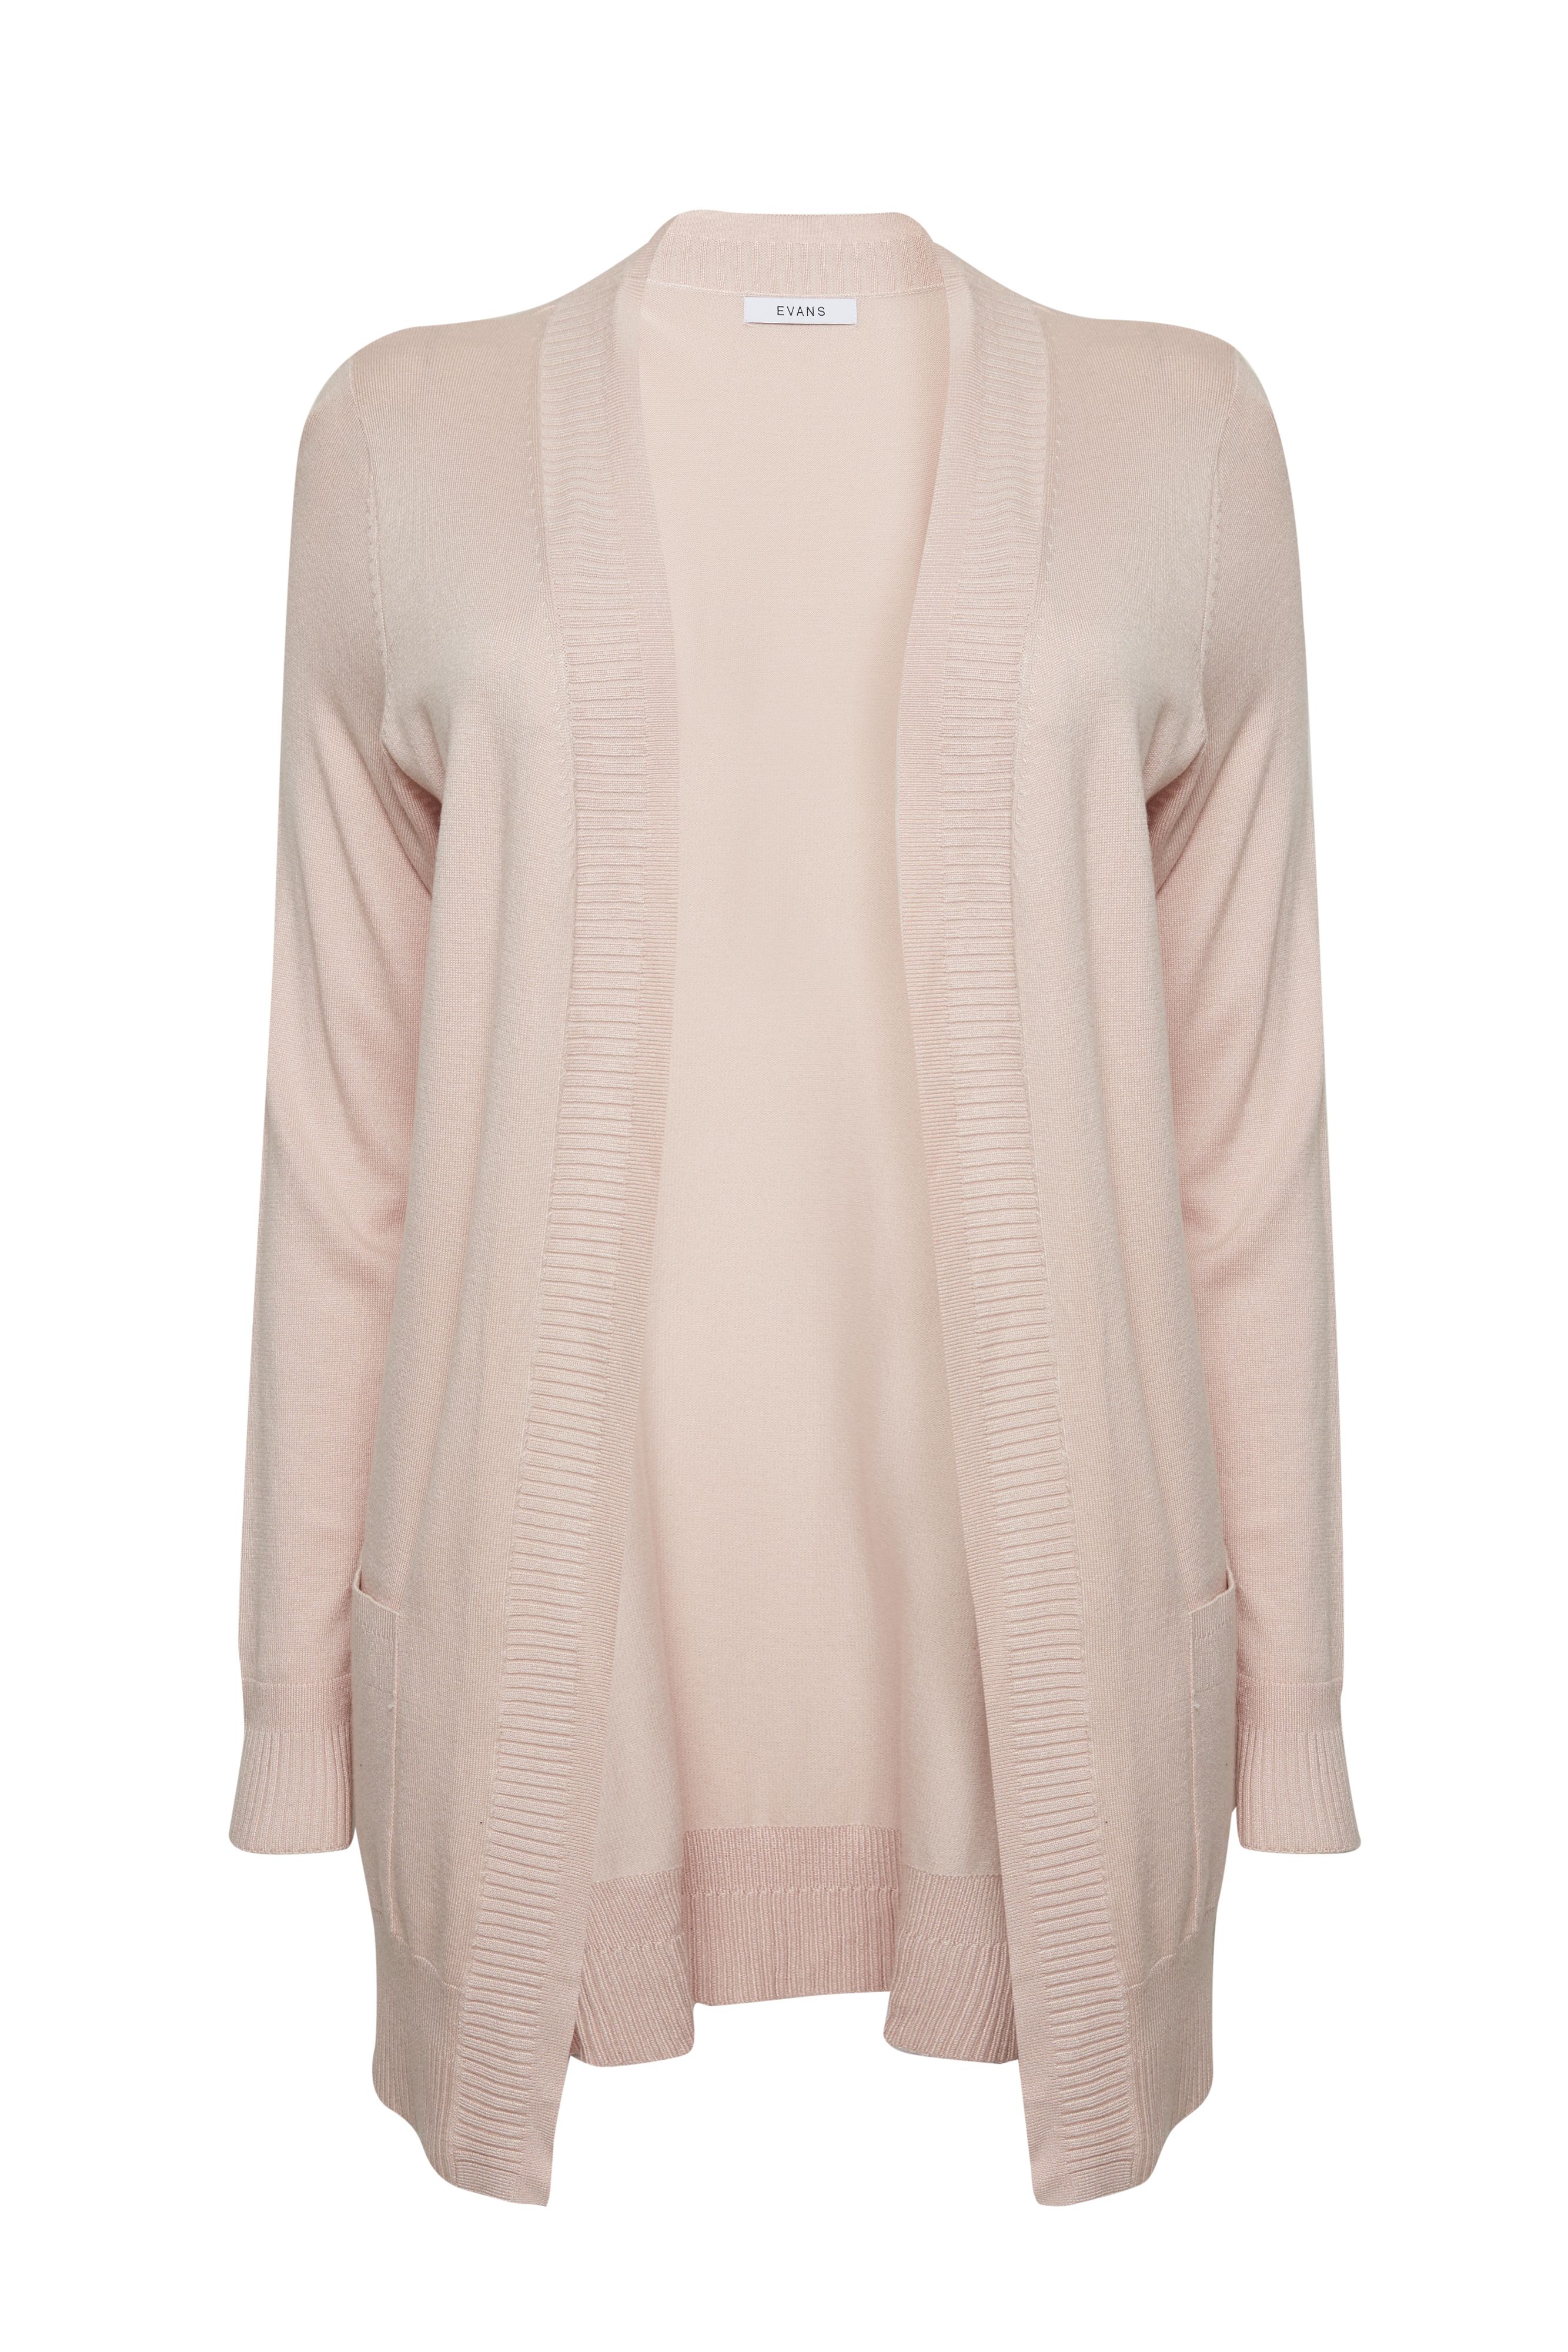 Cute, cosy and simple, the Fine Knit Cardigan is a go-to staple for crisp days. A timeless addition to your knitwear collection, the sweet pink hue brings a touch of femininity and soft colour. Key Features Include: - Open collarless neckline - Long sleeves - Stretch knit fabrication - Relaxed fit - Hip length Running the errands? Throw over your tee and jeans for easy styling. Just finish with a pair of fresh white trainers and you're good to go!